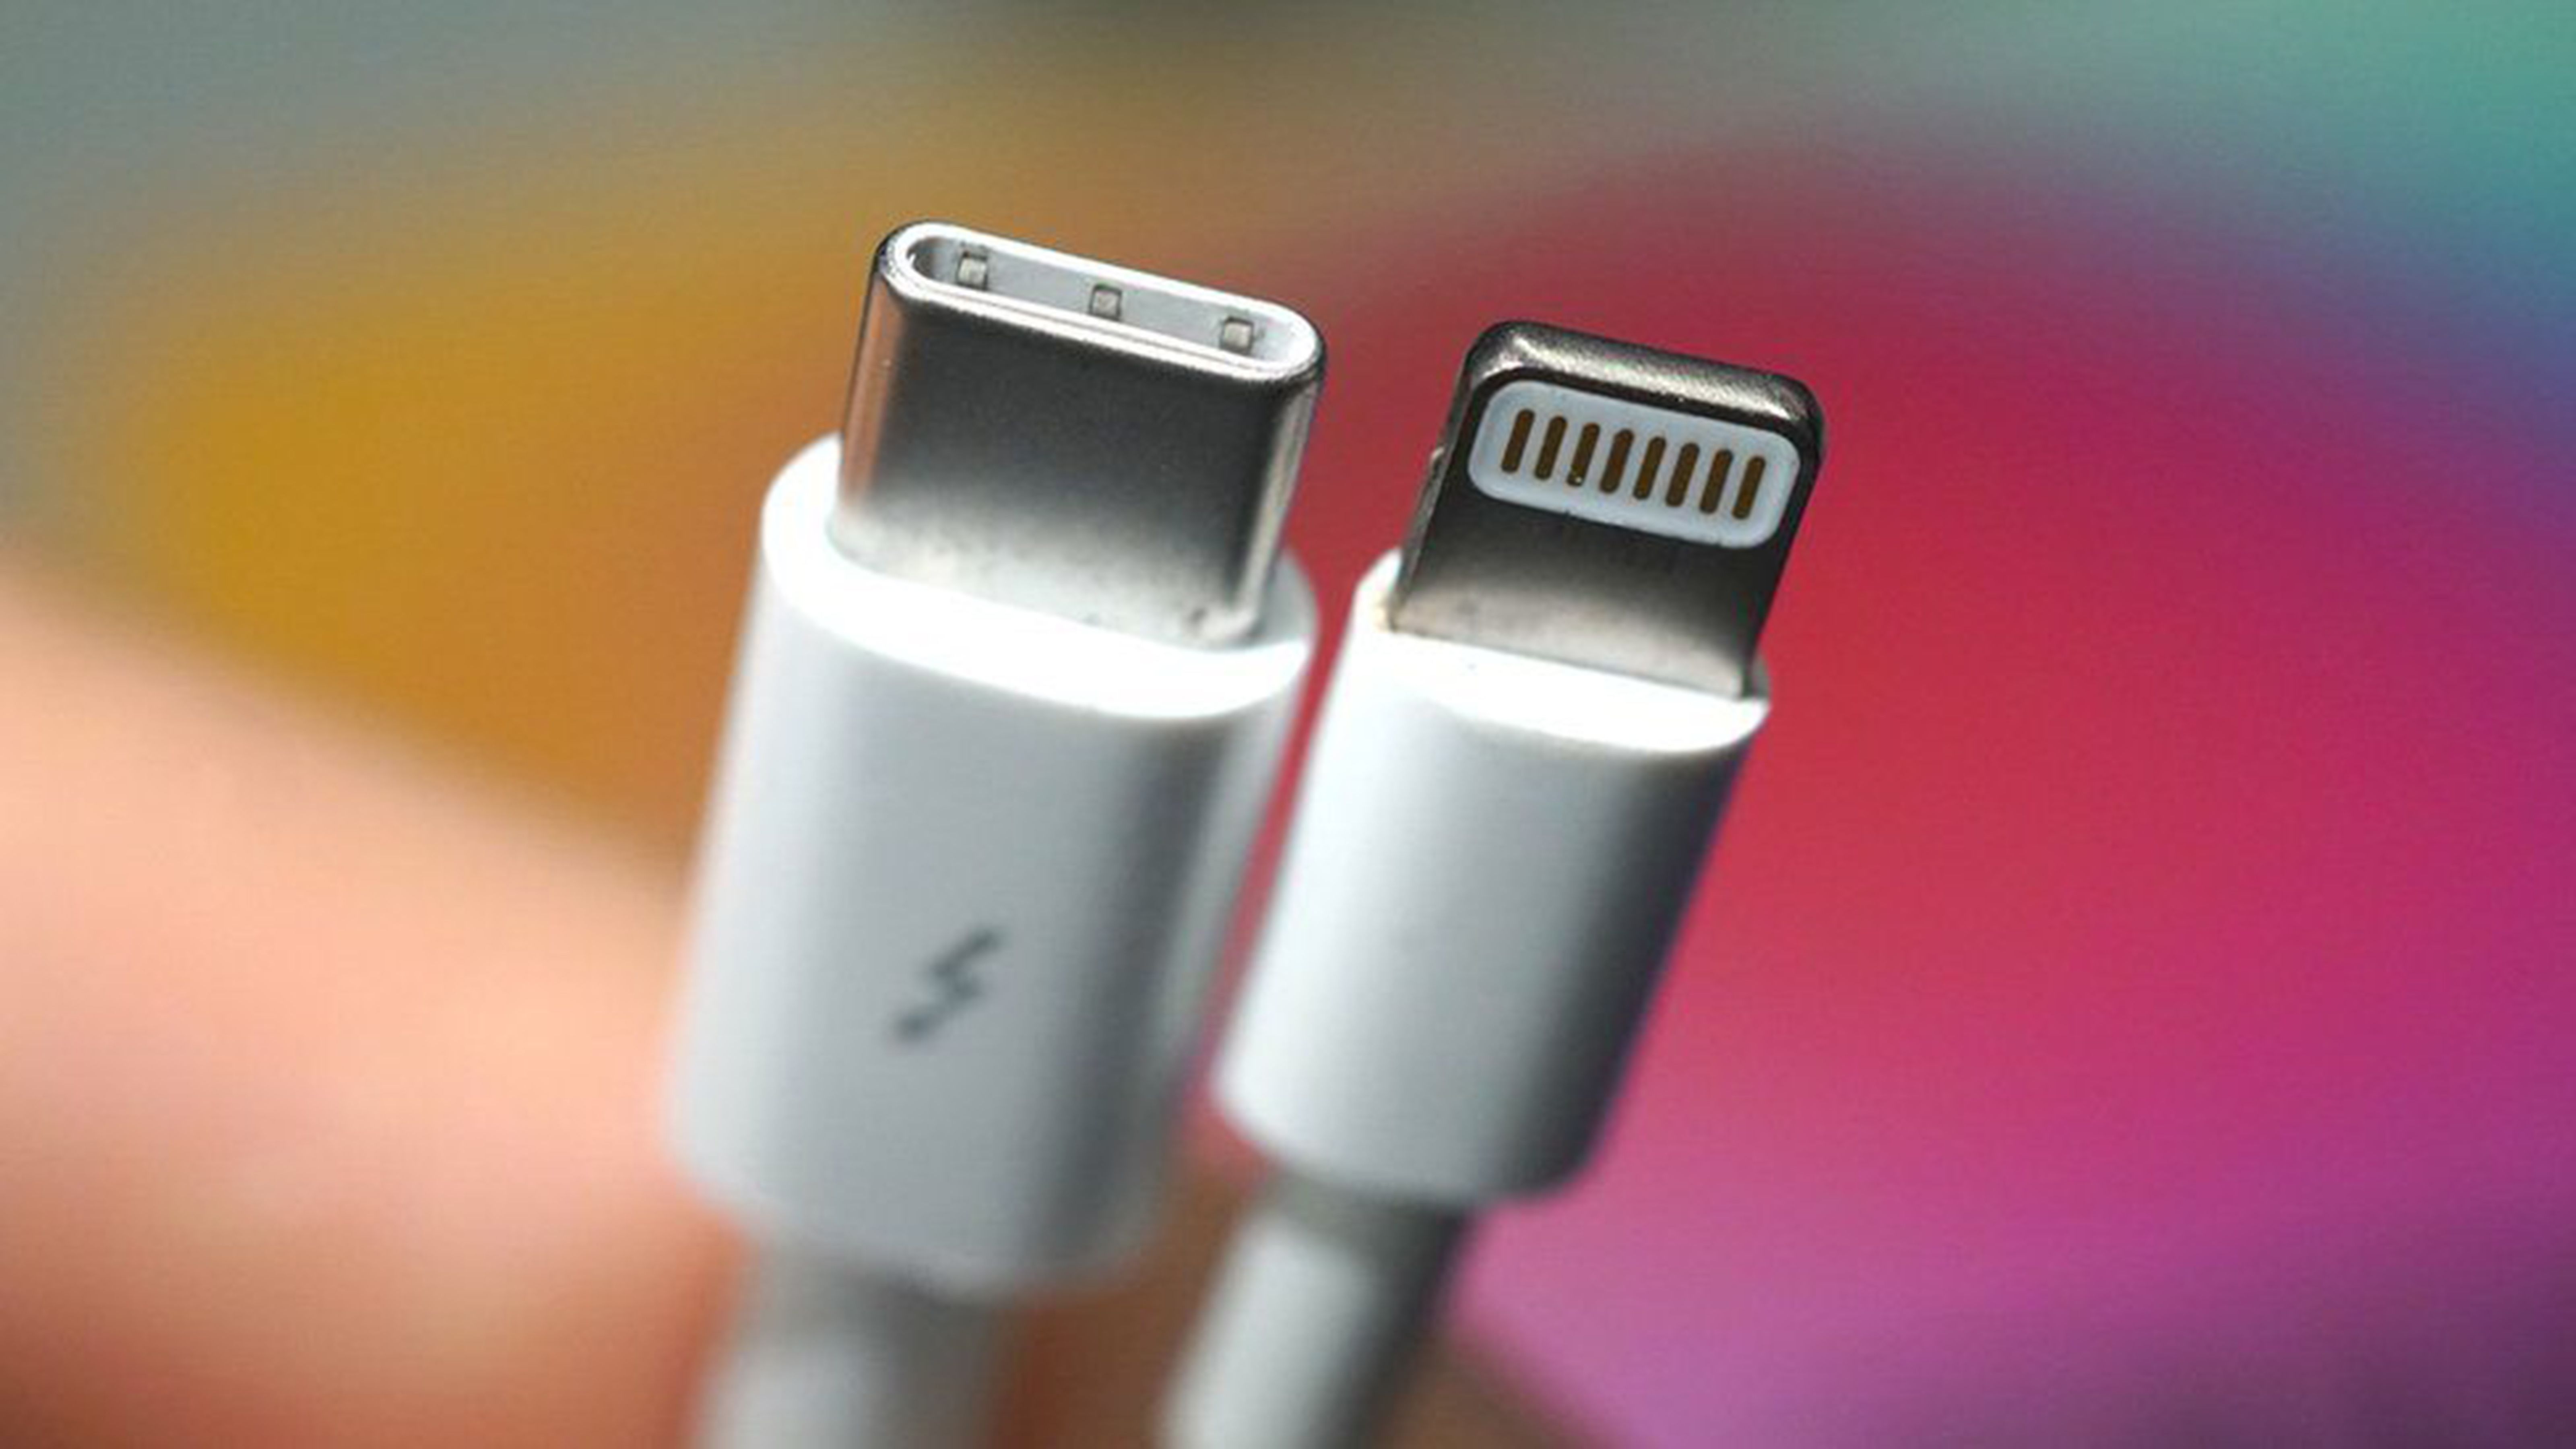 Putting the ‘universal’ in USB Apple may be forced to use USB-C ports on iPhones photo from BBC